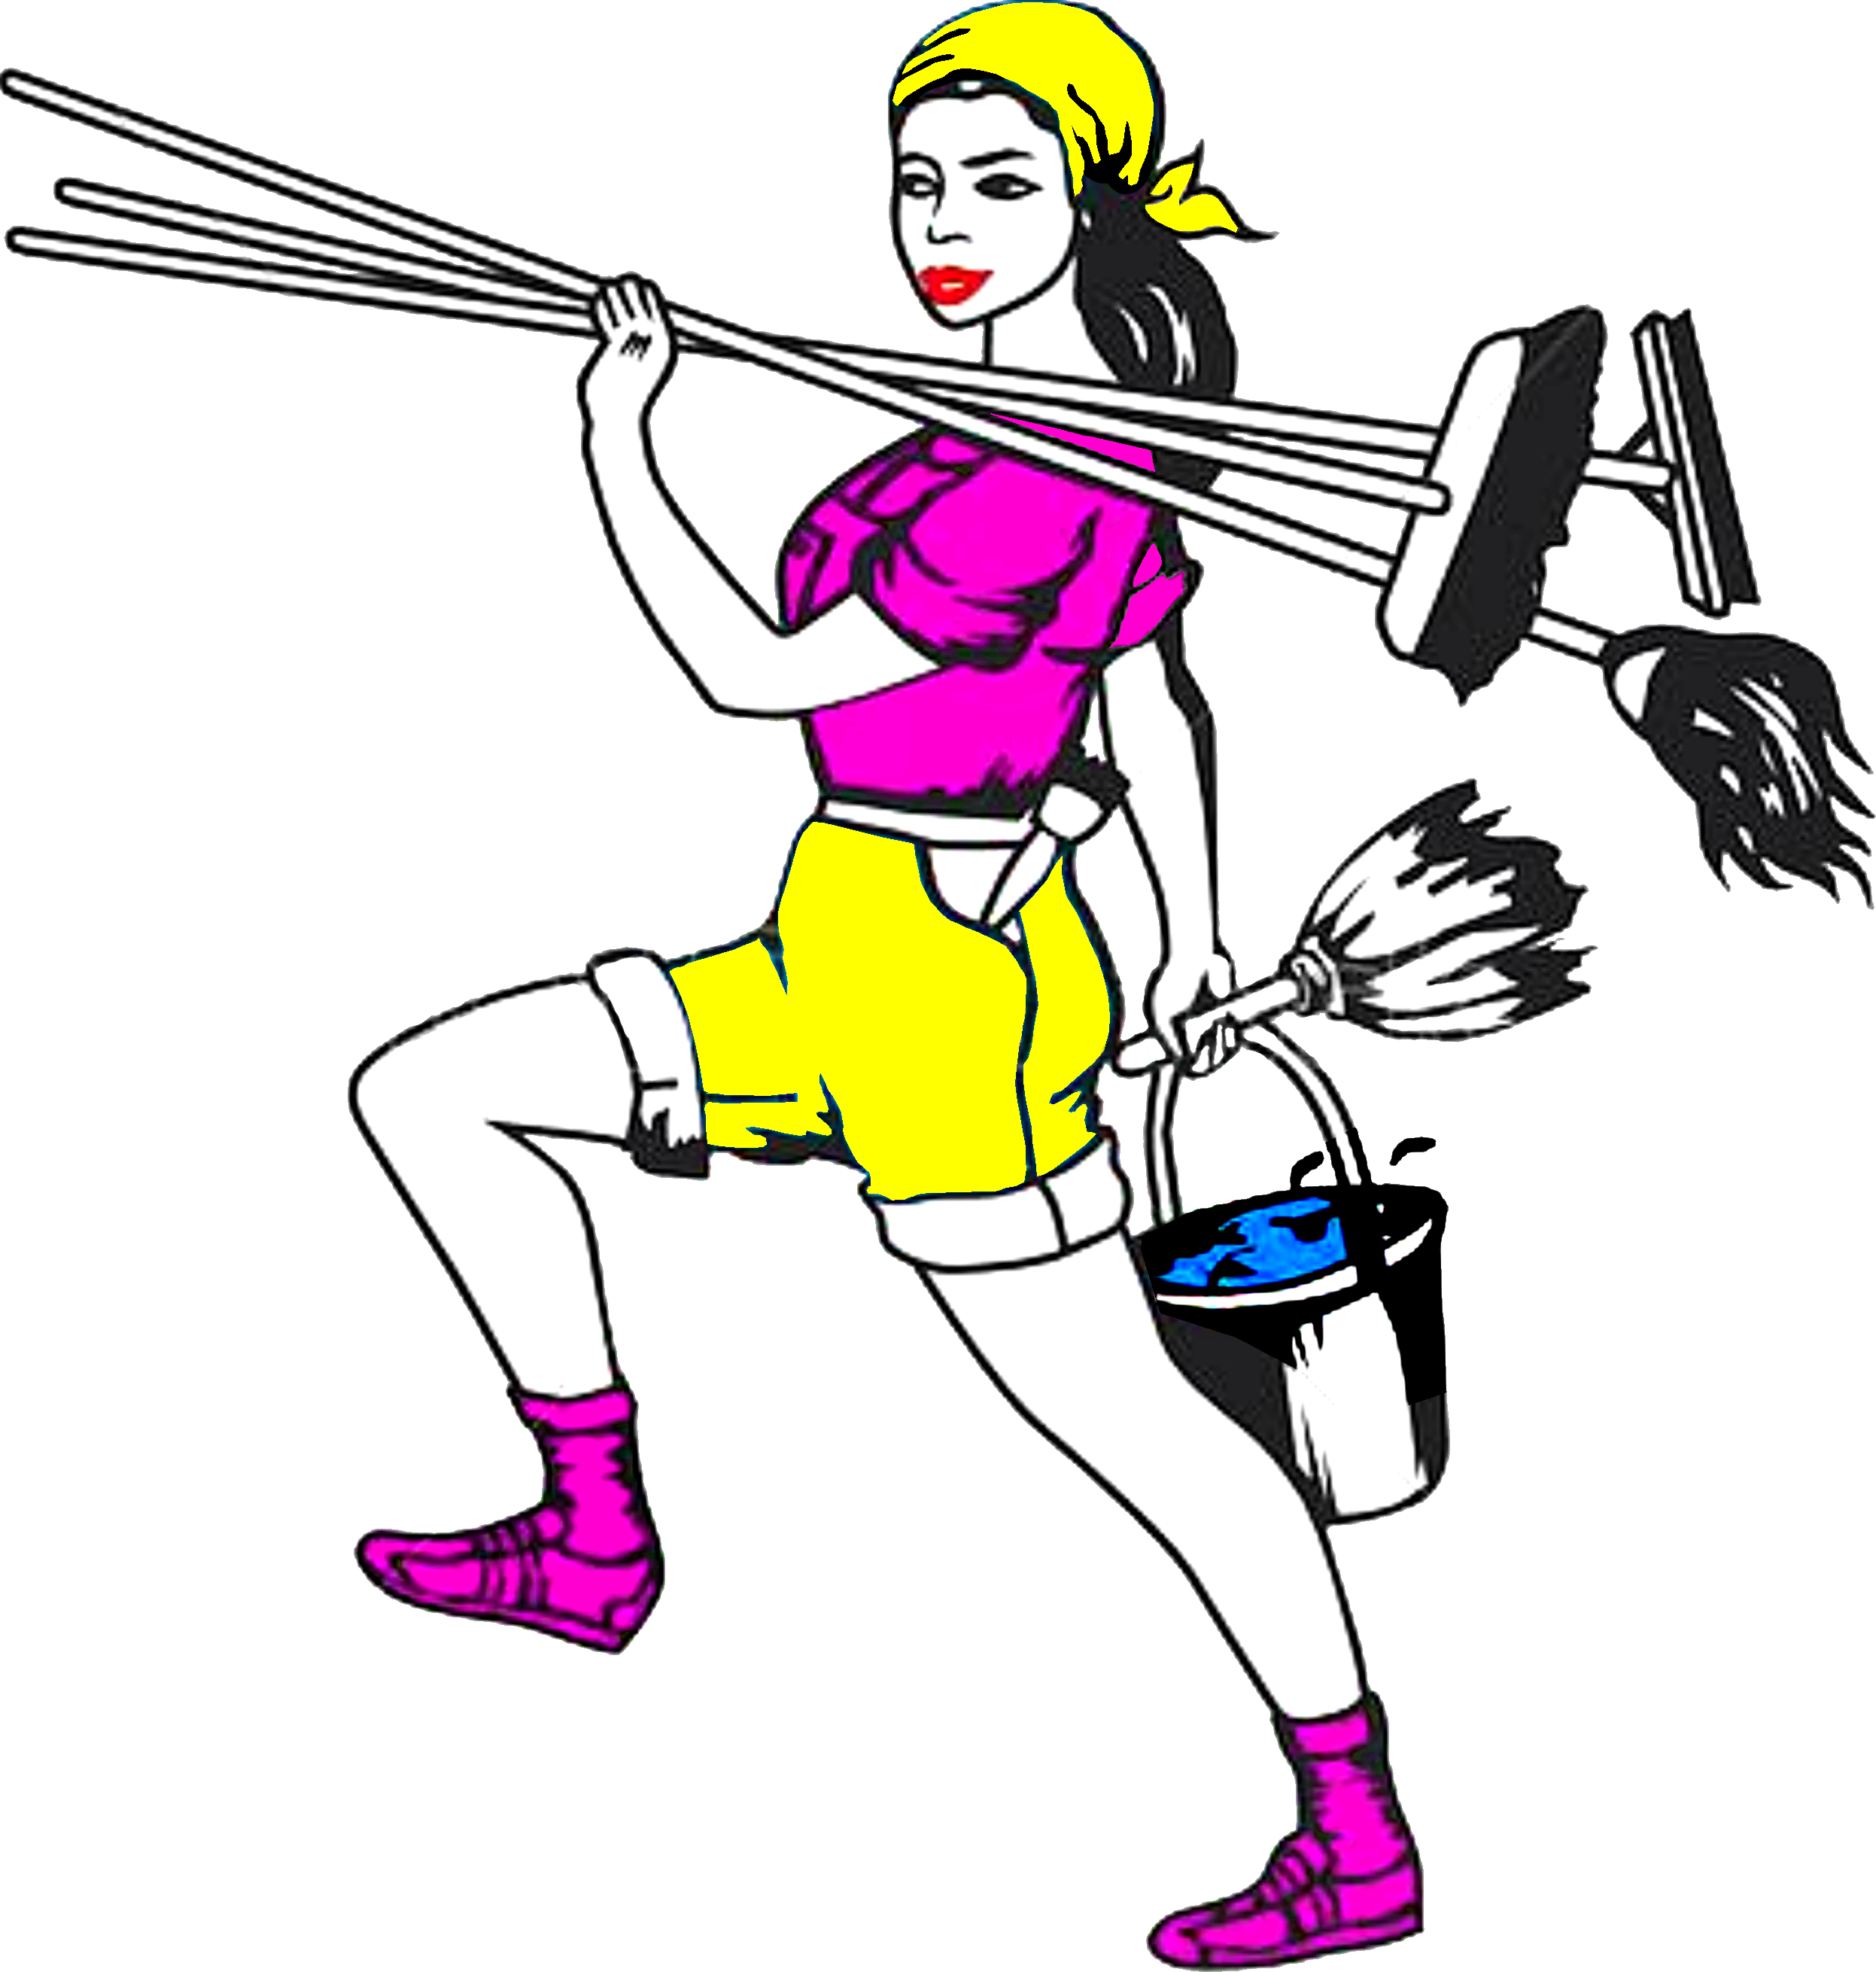 Cleaning Cleaner Housekeeping Maid Service Clip Art - Cleaning Cleaner Housekeeping Maid Service Clip Art (2493x2620)